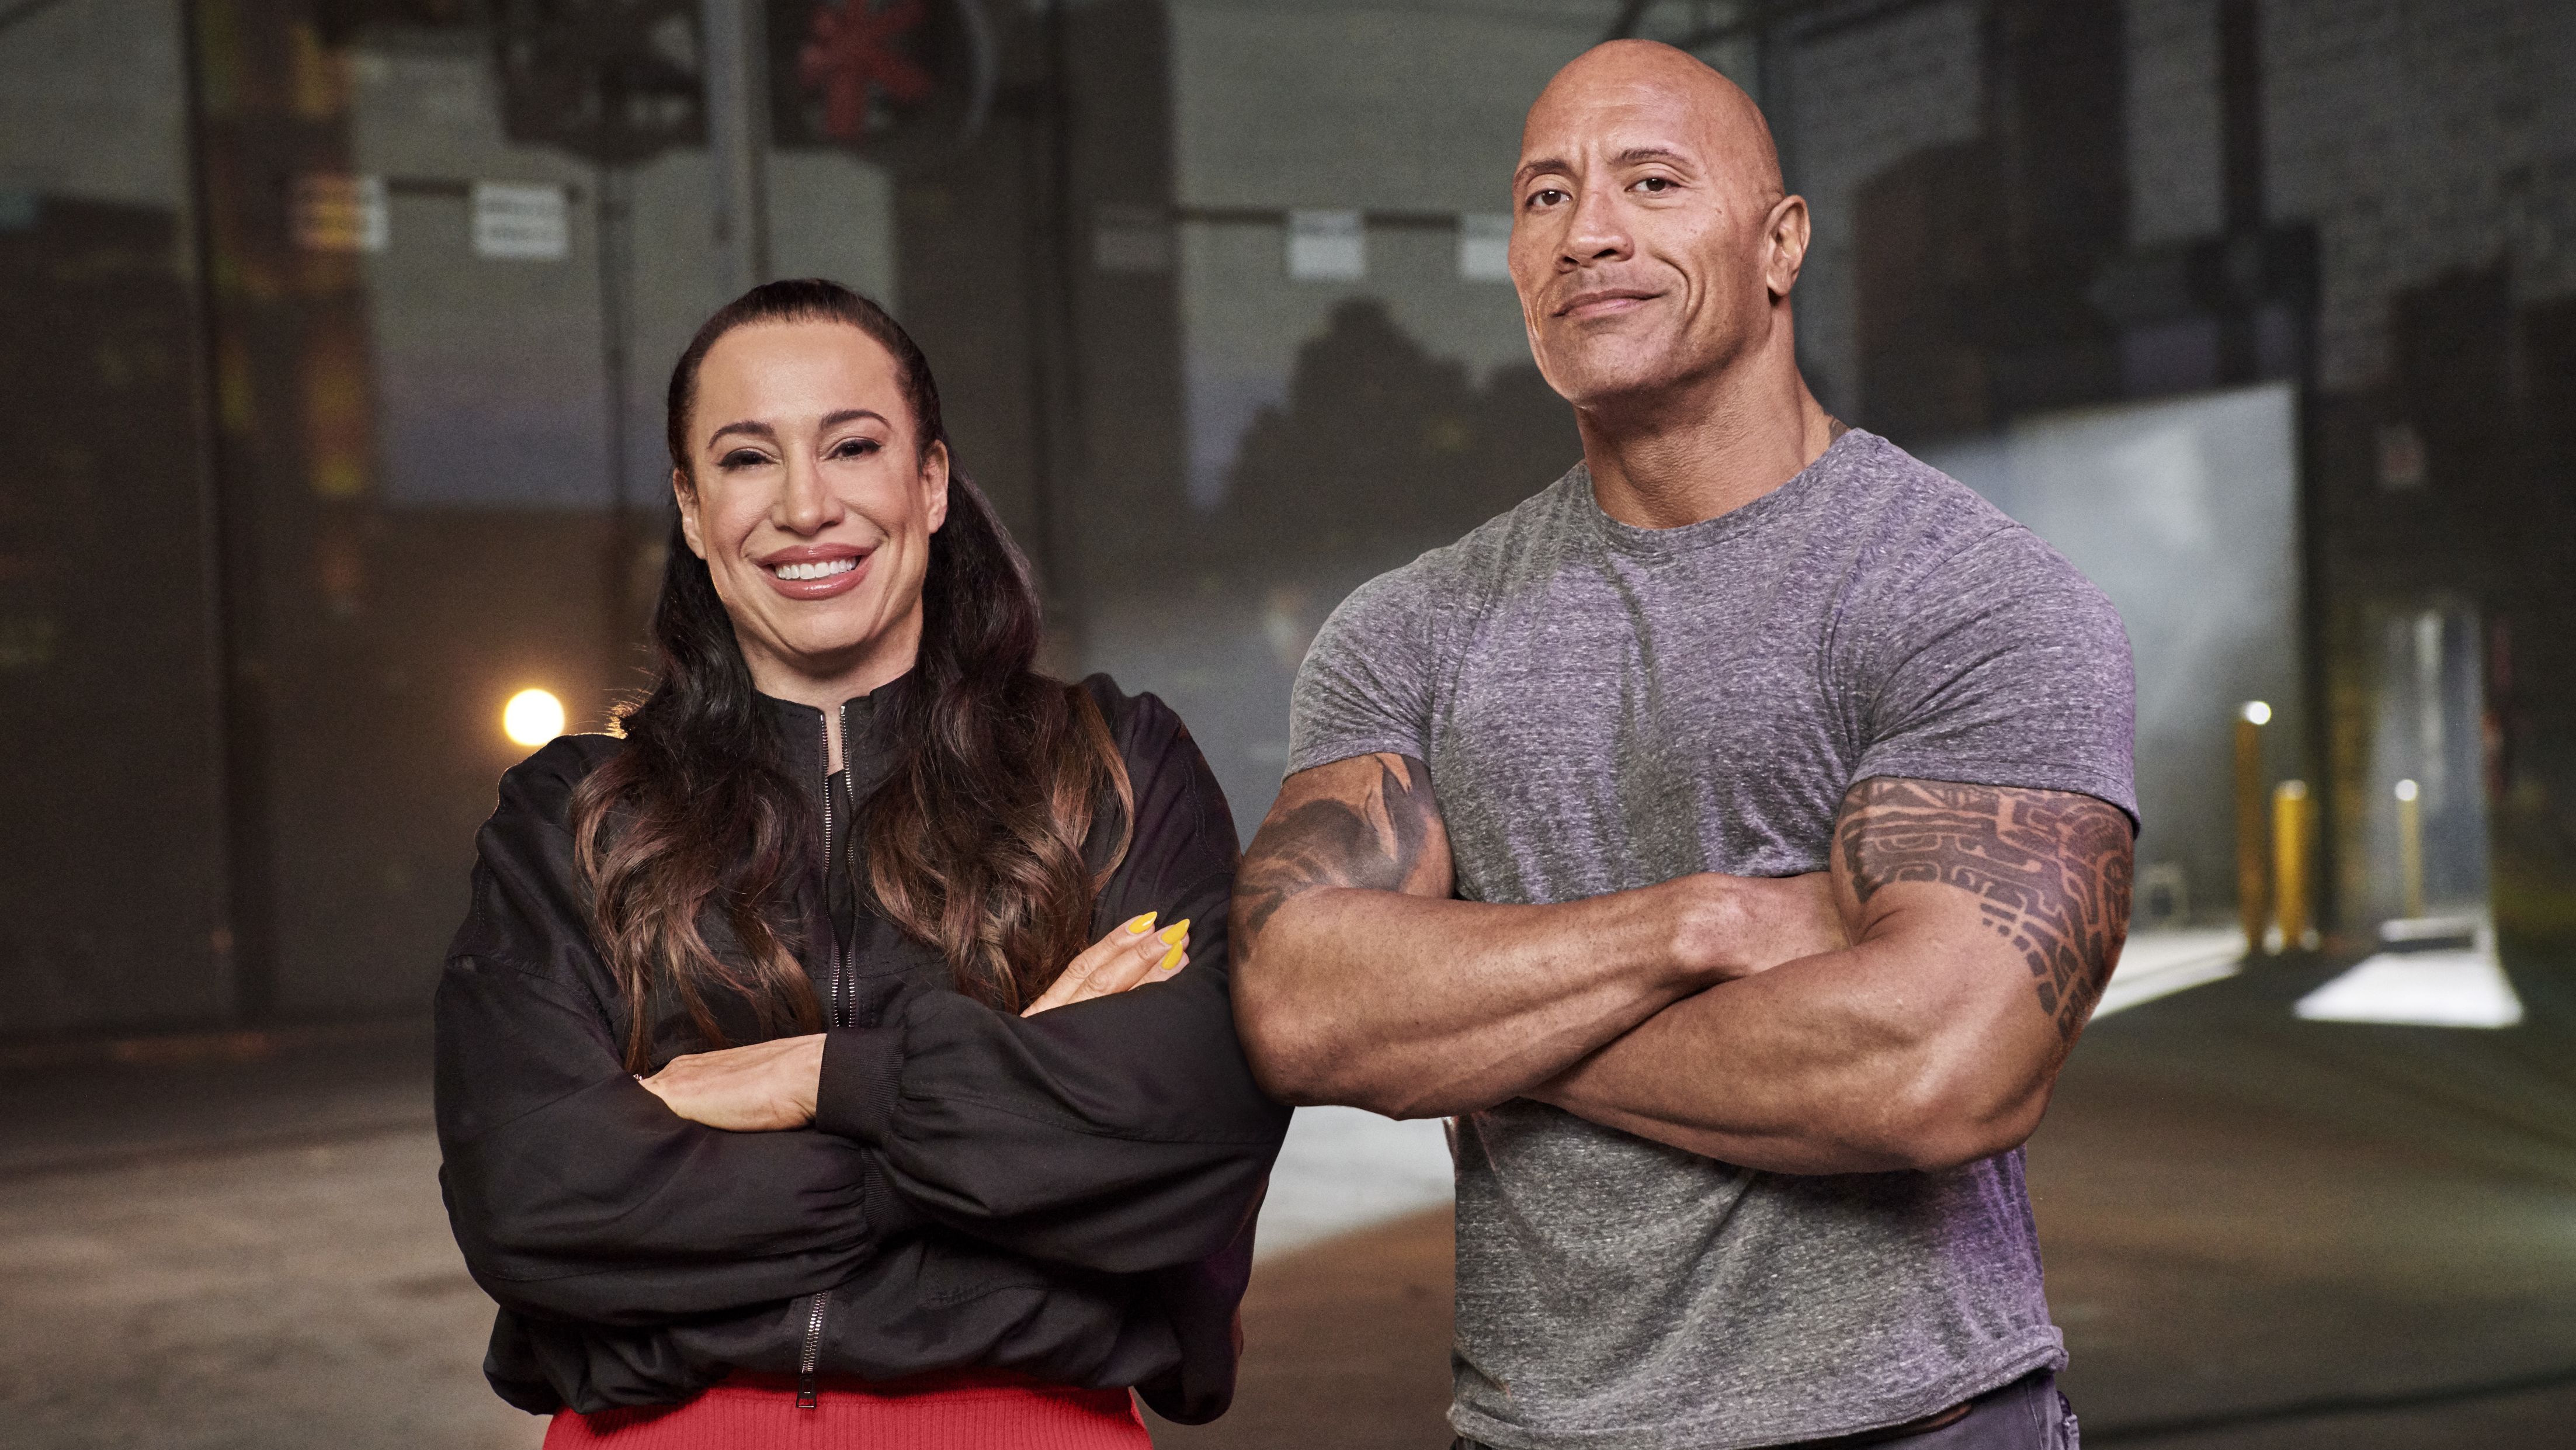 Dany Garcia and Dwayne Johnson are launching their own convention in 2020 called Athleticon that will highlight and celebrate athletics, wellness and entertainment.